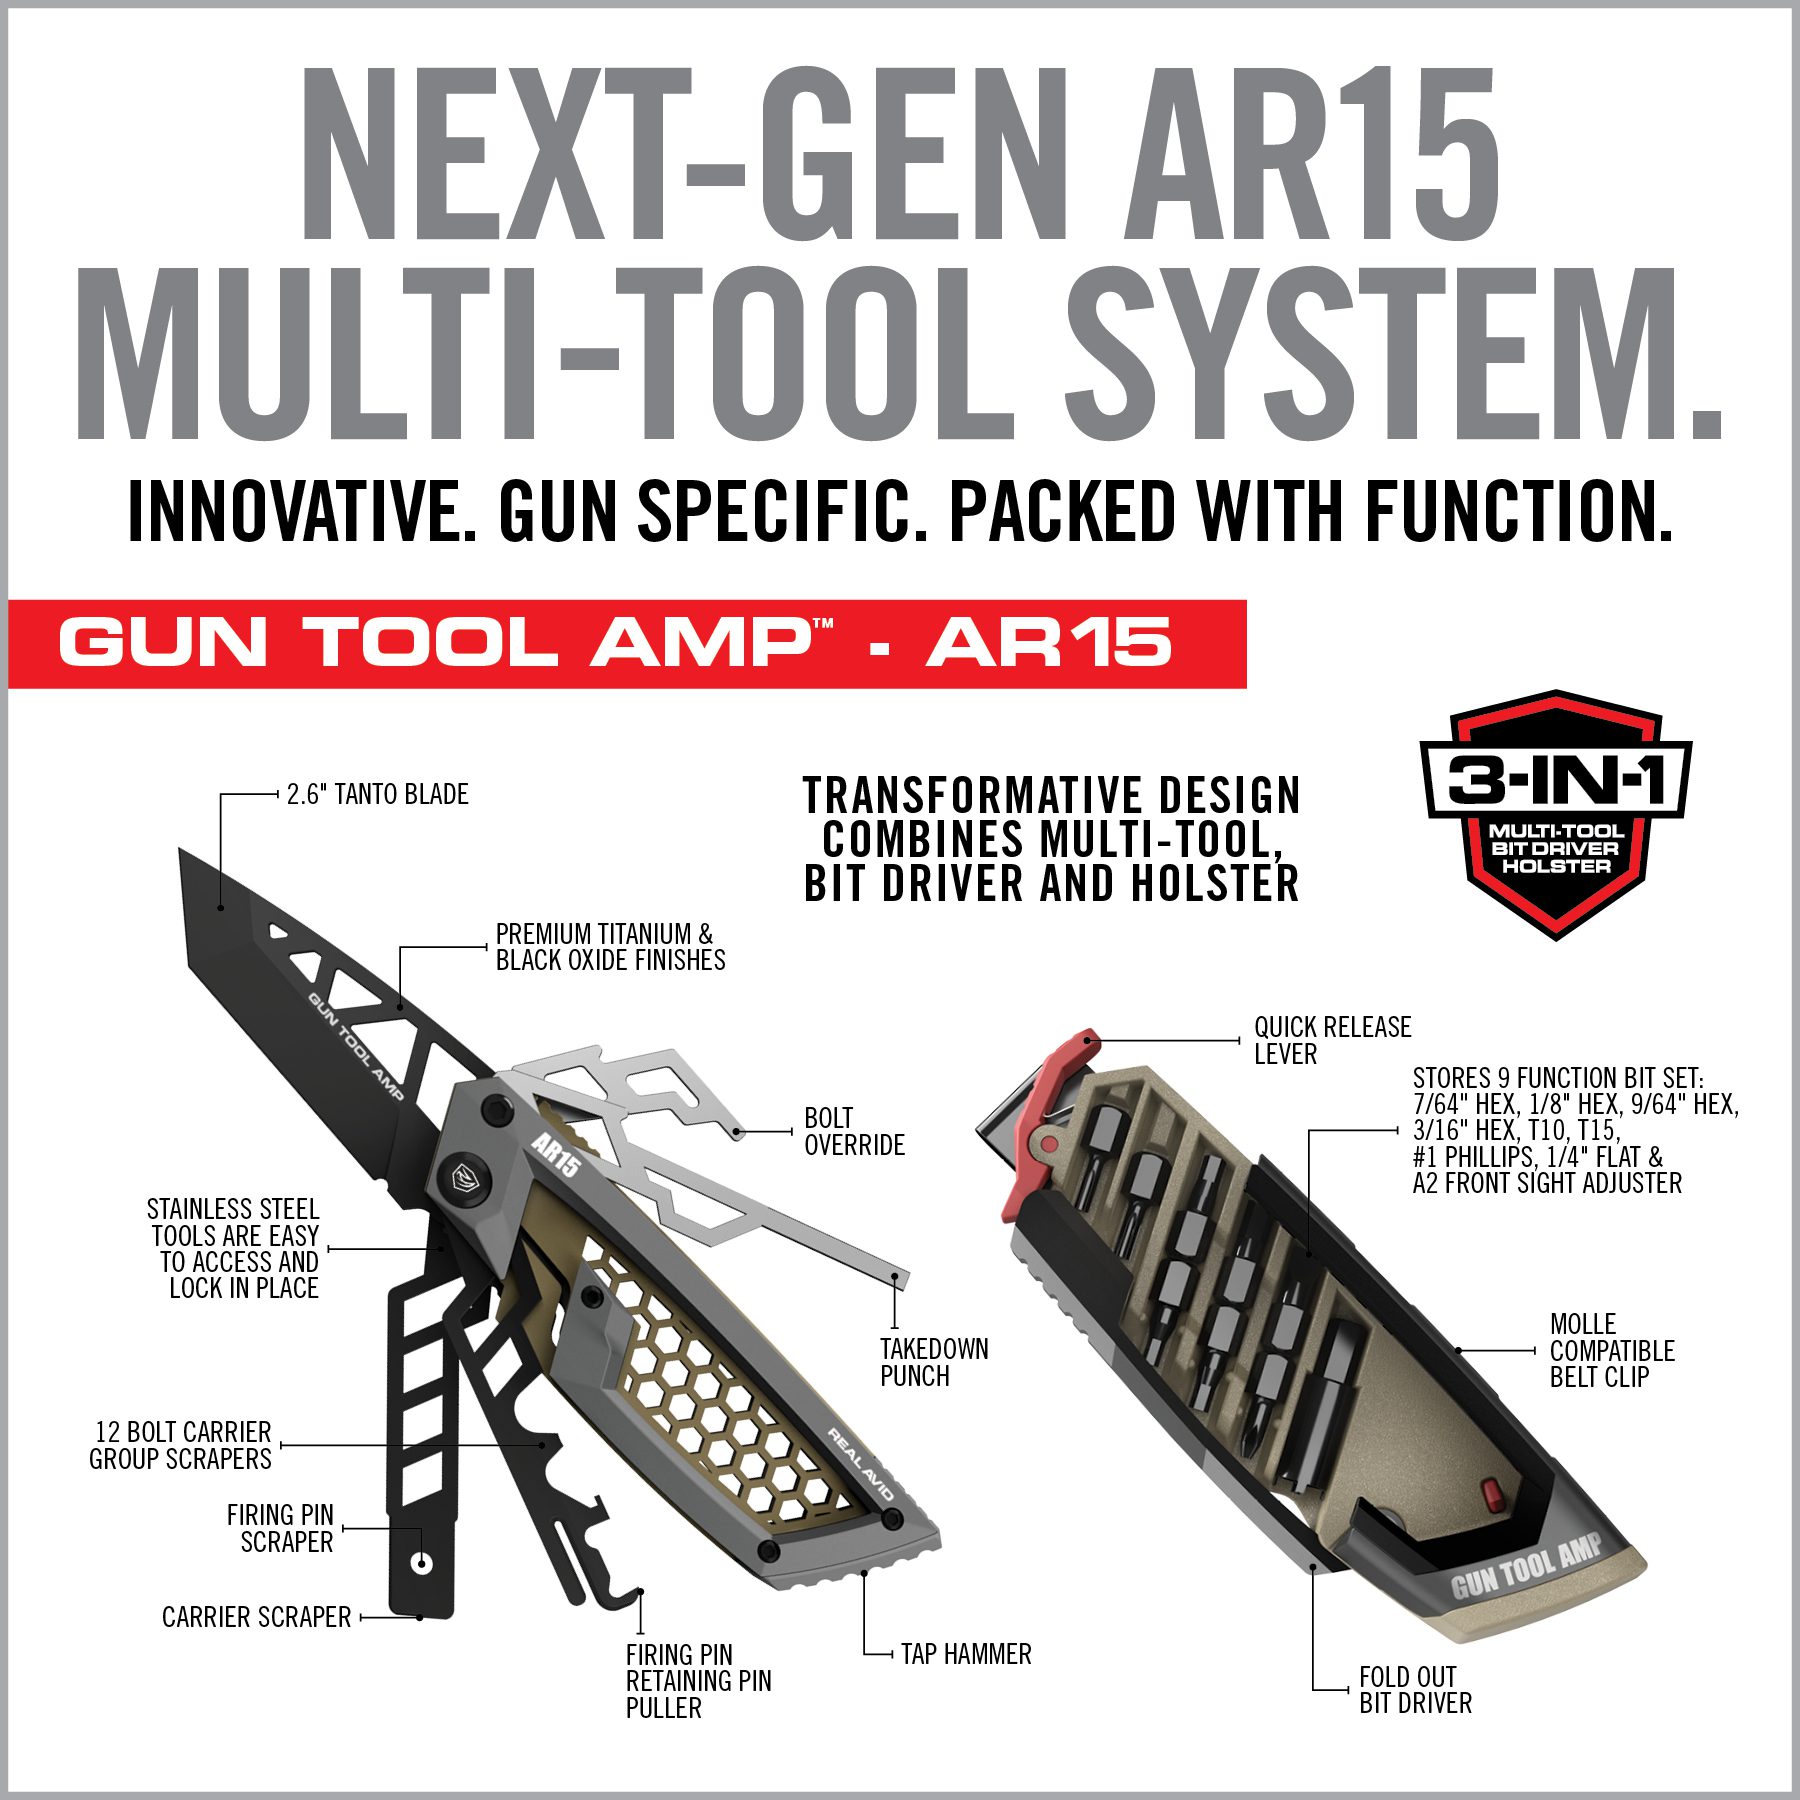 an advertisement for the next gen ar 15 multi tool system